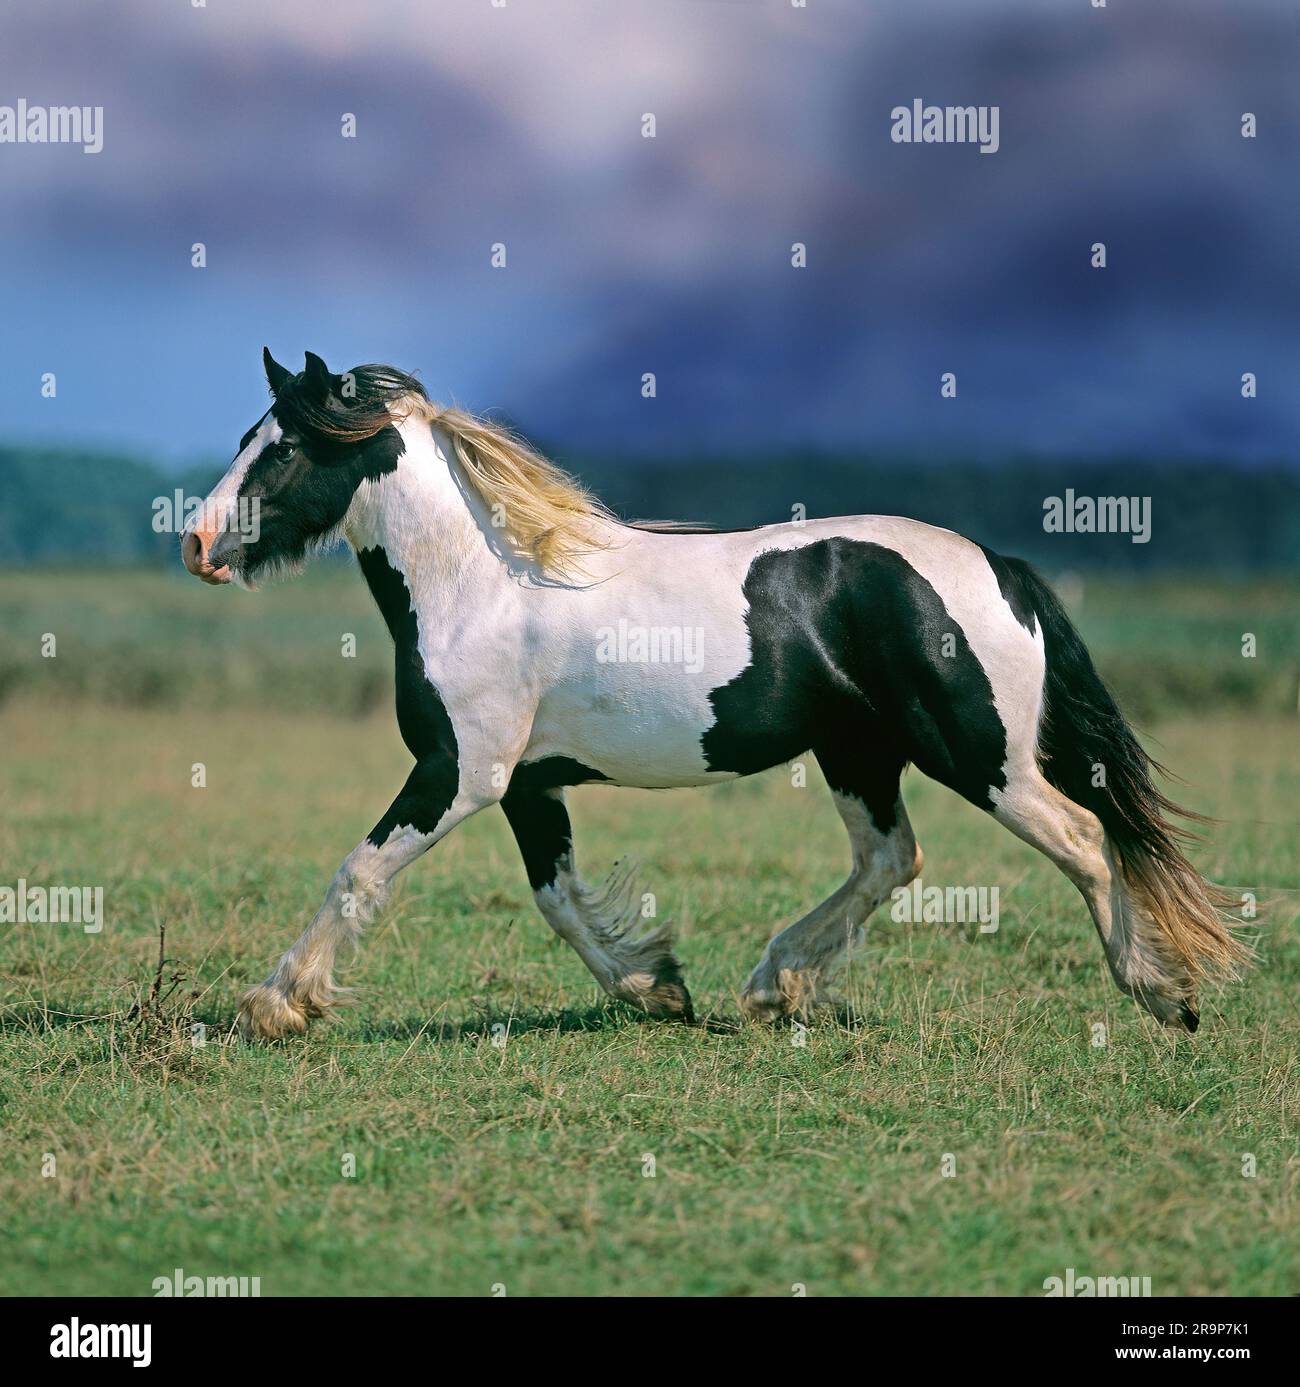 Irish Tinker. Piebald horse trotting on a pasture, seen against a stormy sky. Wales, Great Britain Stock Photo